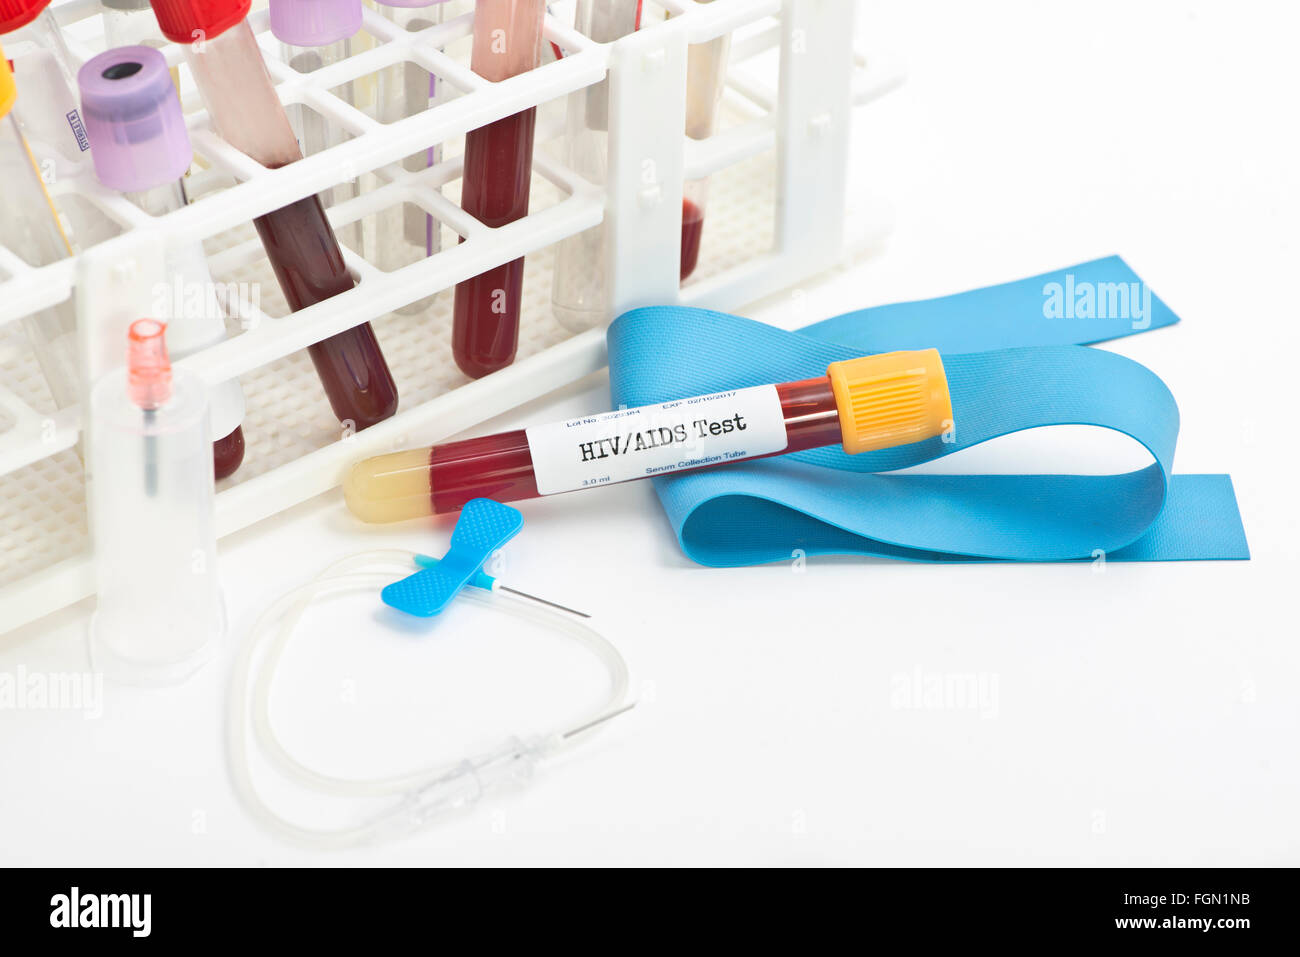 HIV blood analysis collection tube with tube rack.  Labels and document are fictitious and created by the photographer. Stock Photo